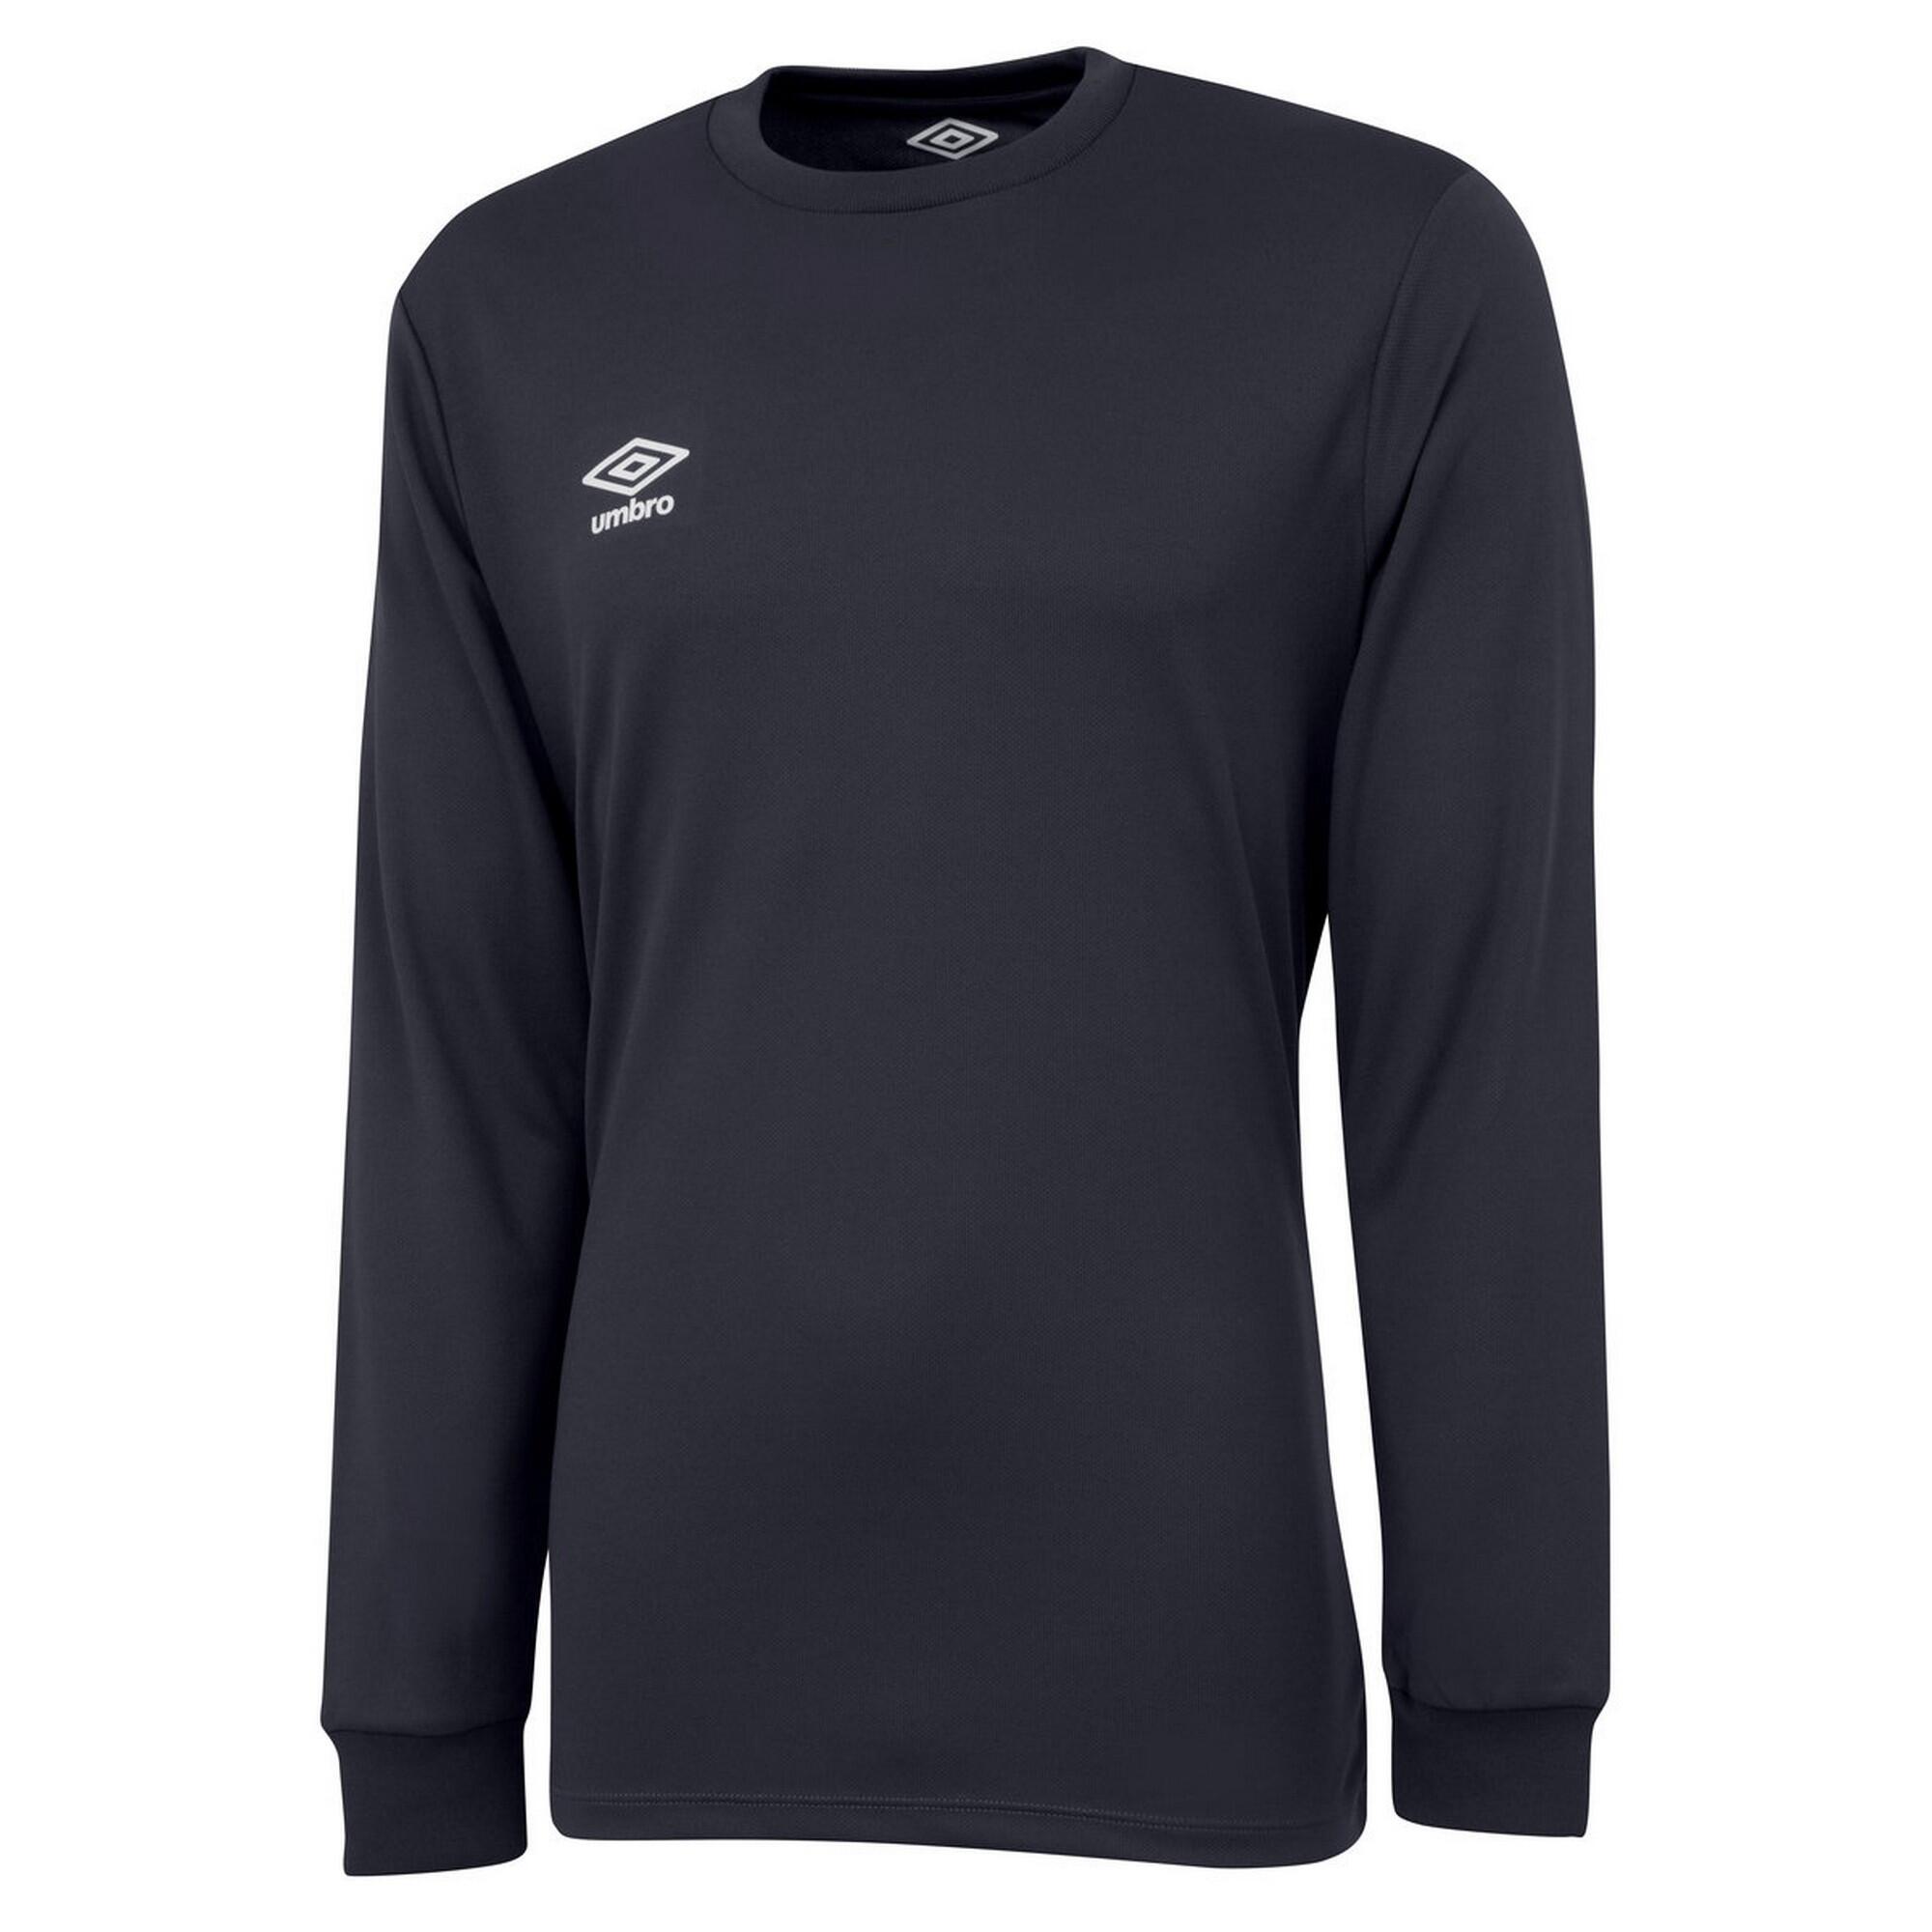 UMBRO Childrens/Kids Club LongSleeved Jersey (Carbon/White)